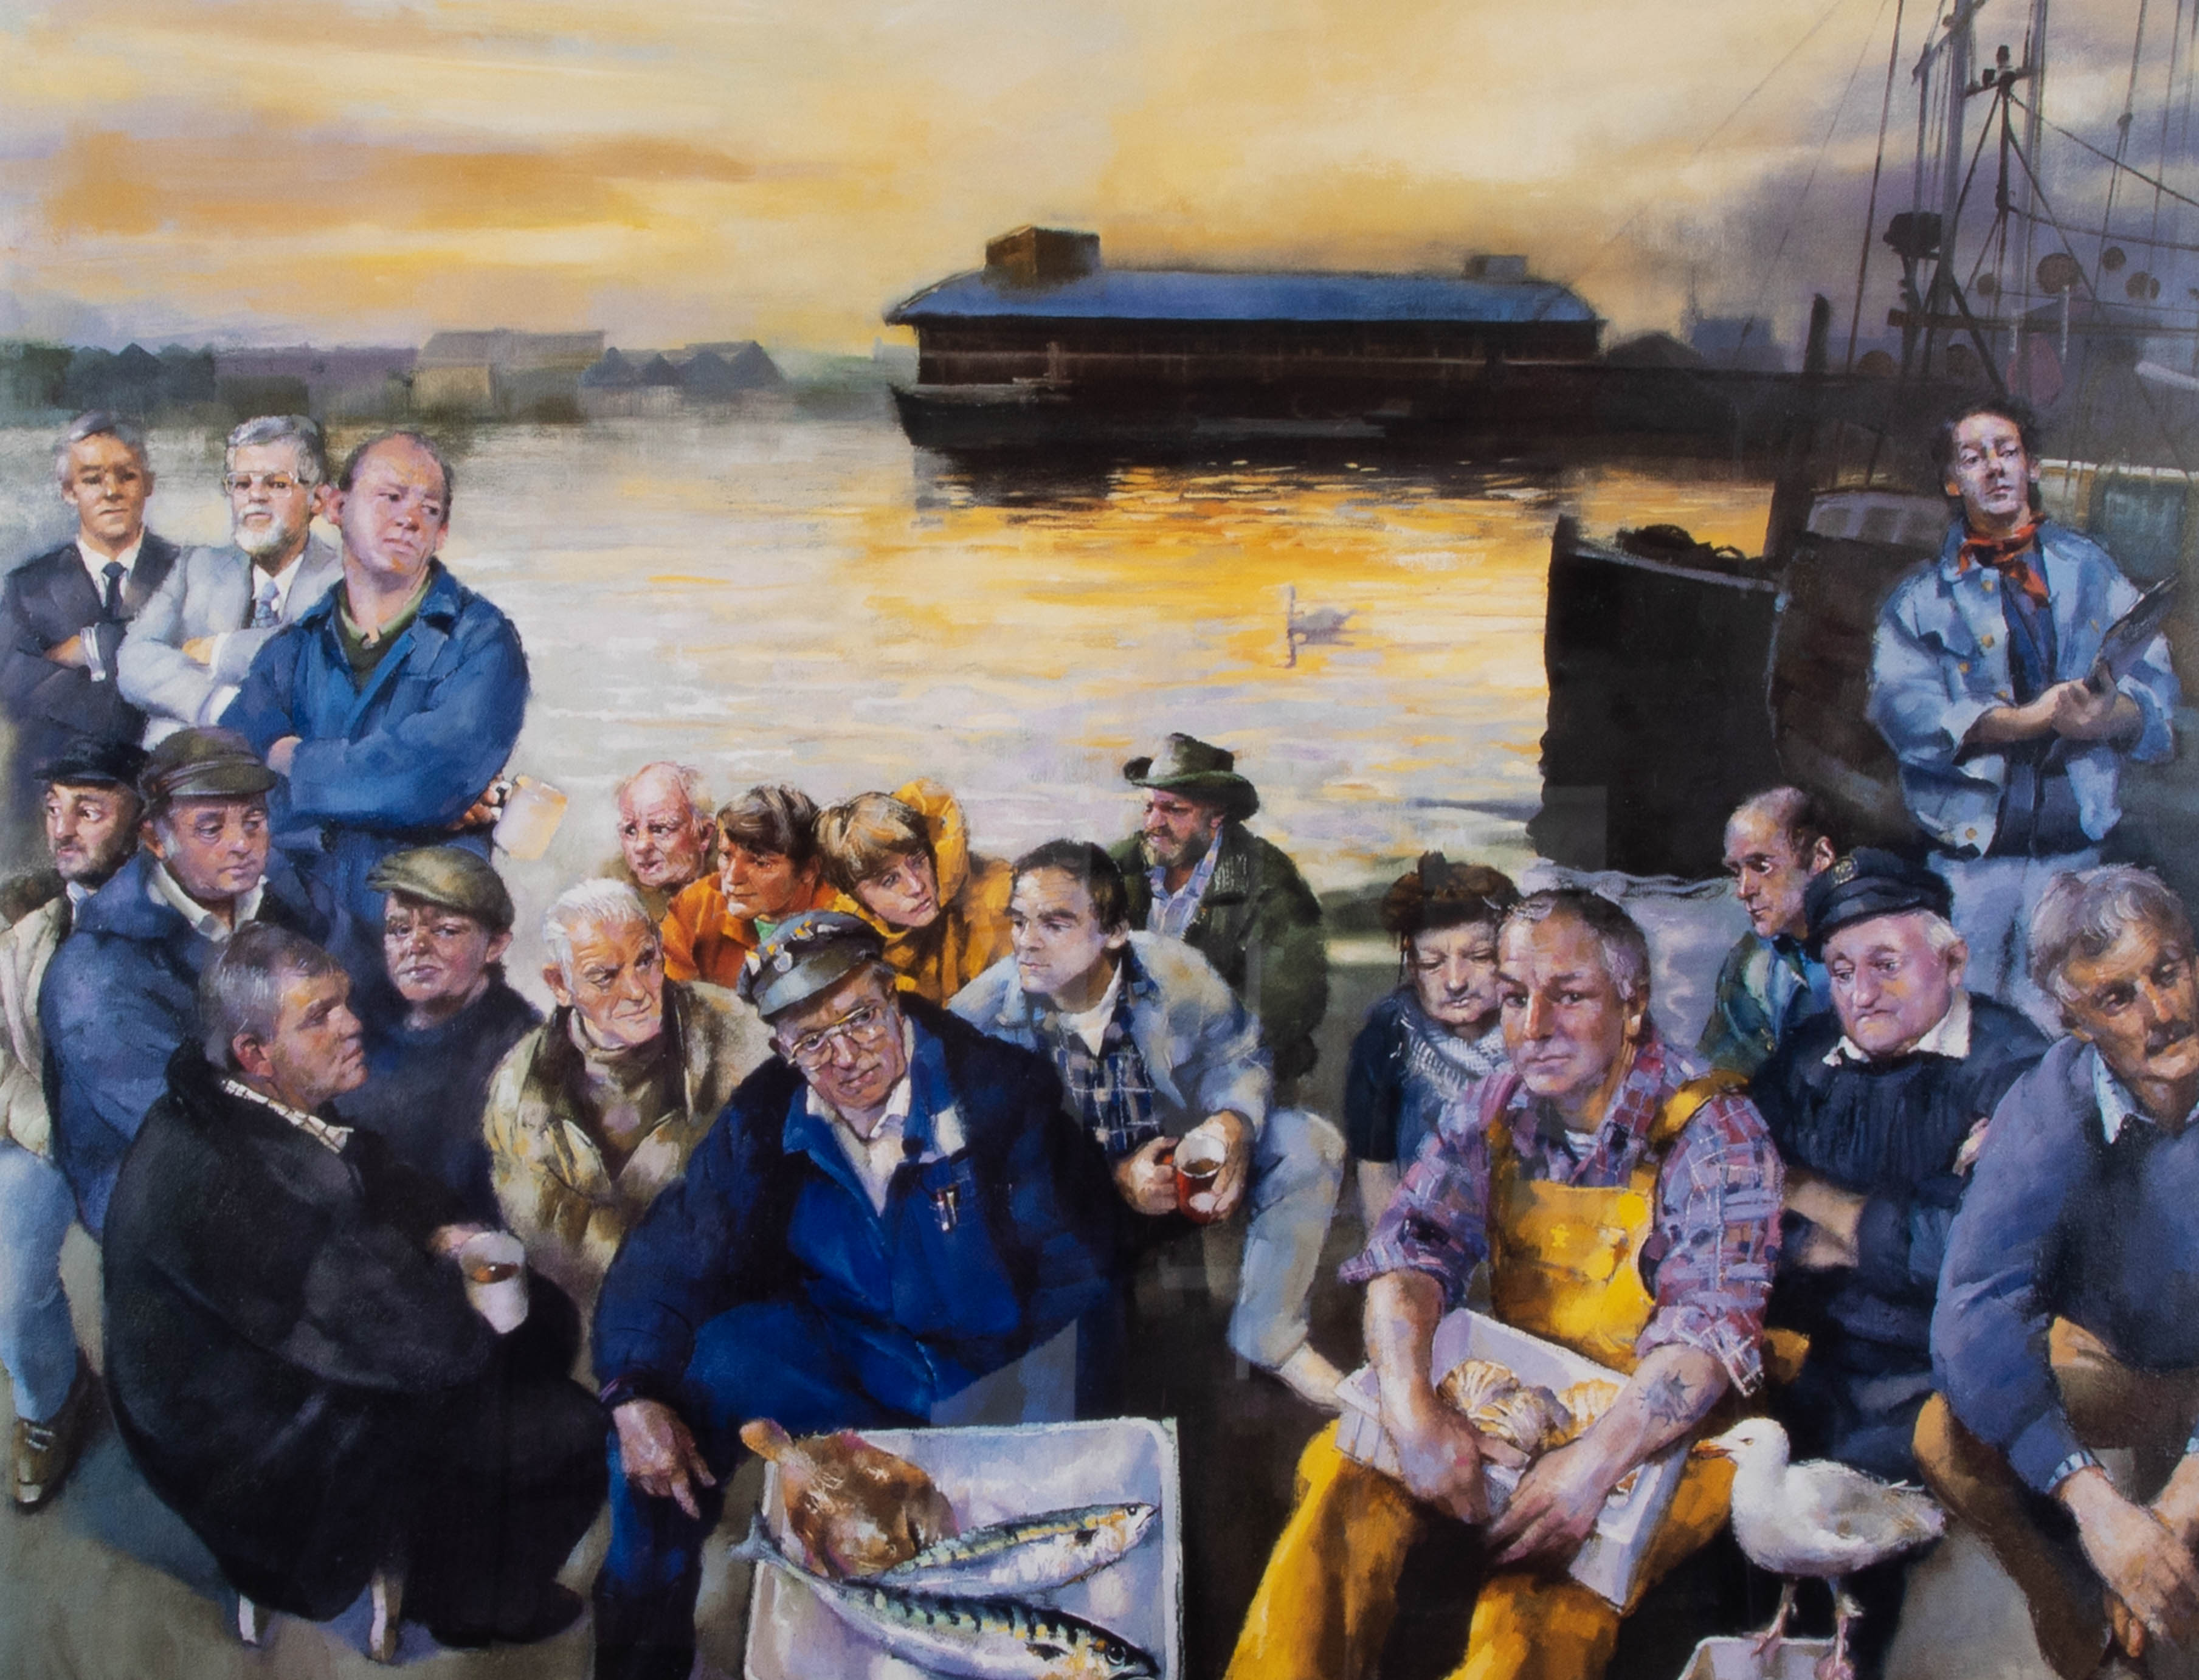 Robert Lenkiewicz, 'The Barbican Fisherman, 2000' signed edition print 95/250, 50cm x 66cm, framed - Image 2 of 2